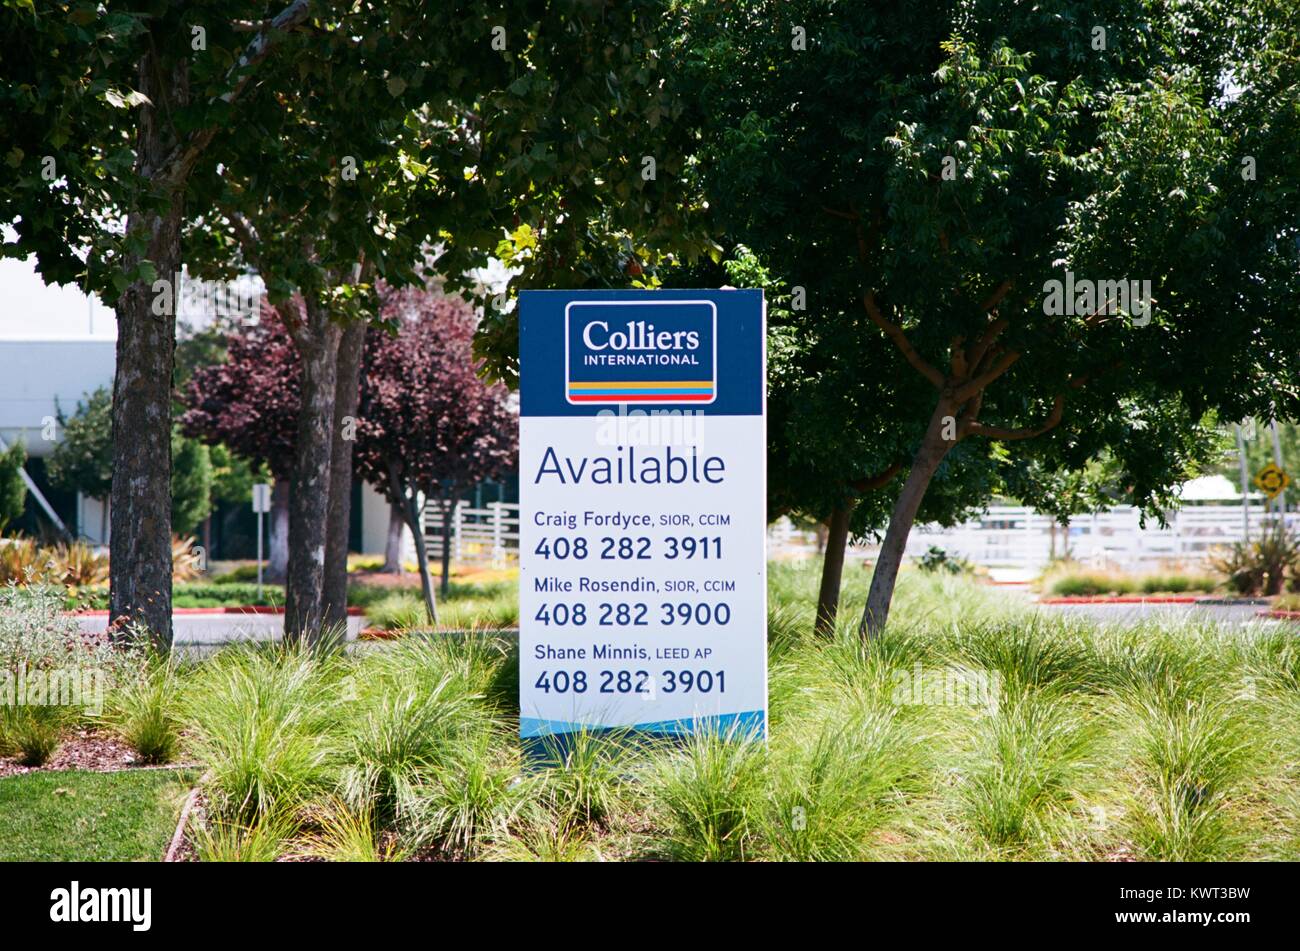 Signage from real estate developer Colliers International with text reading  'Available', advertising the availability of an office park for lease in  the Silicon Valley, Santa Clara, California, August 17, 2017. Silicon Valley